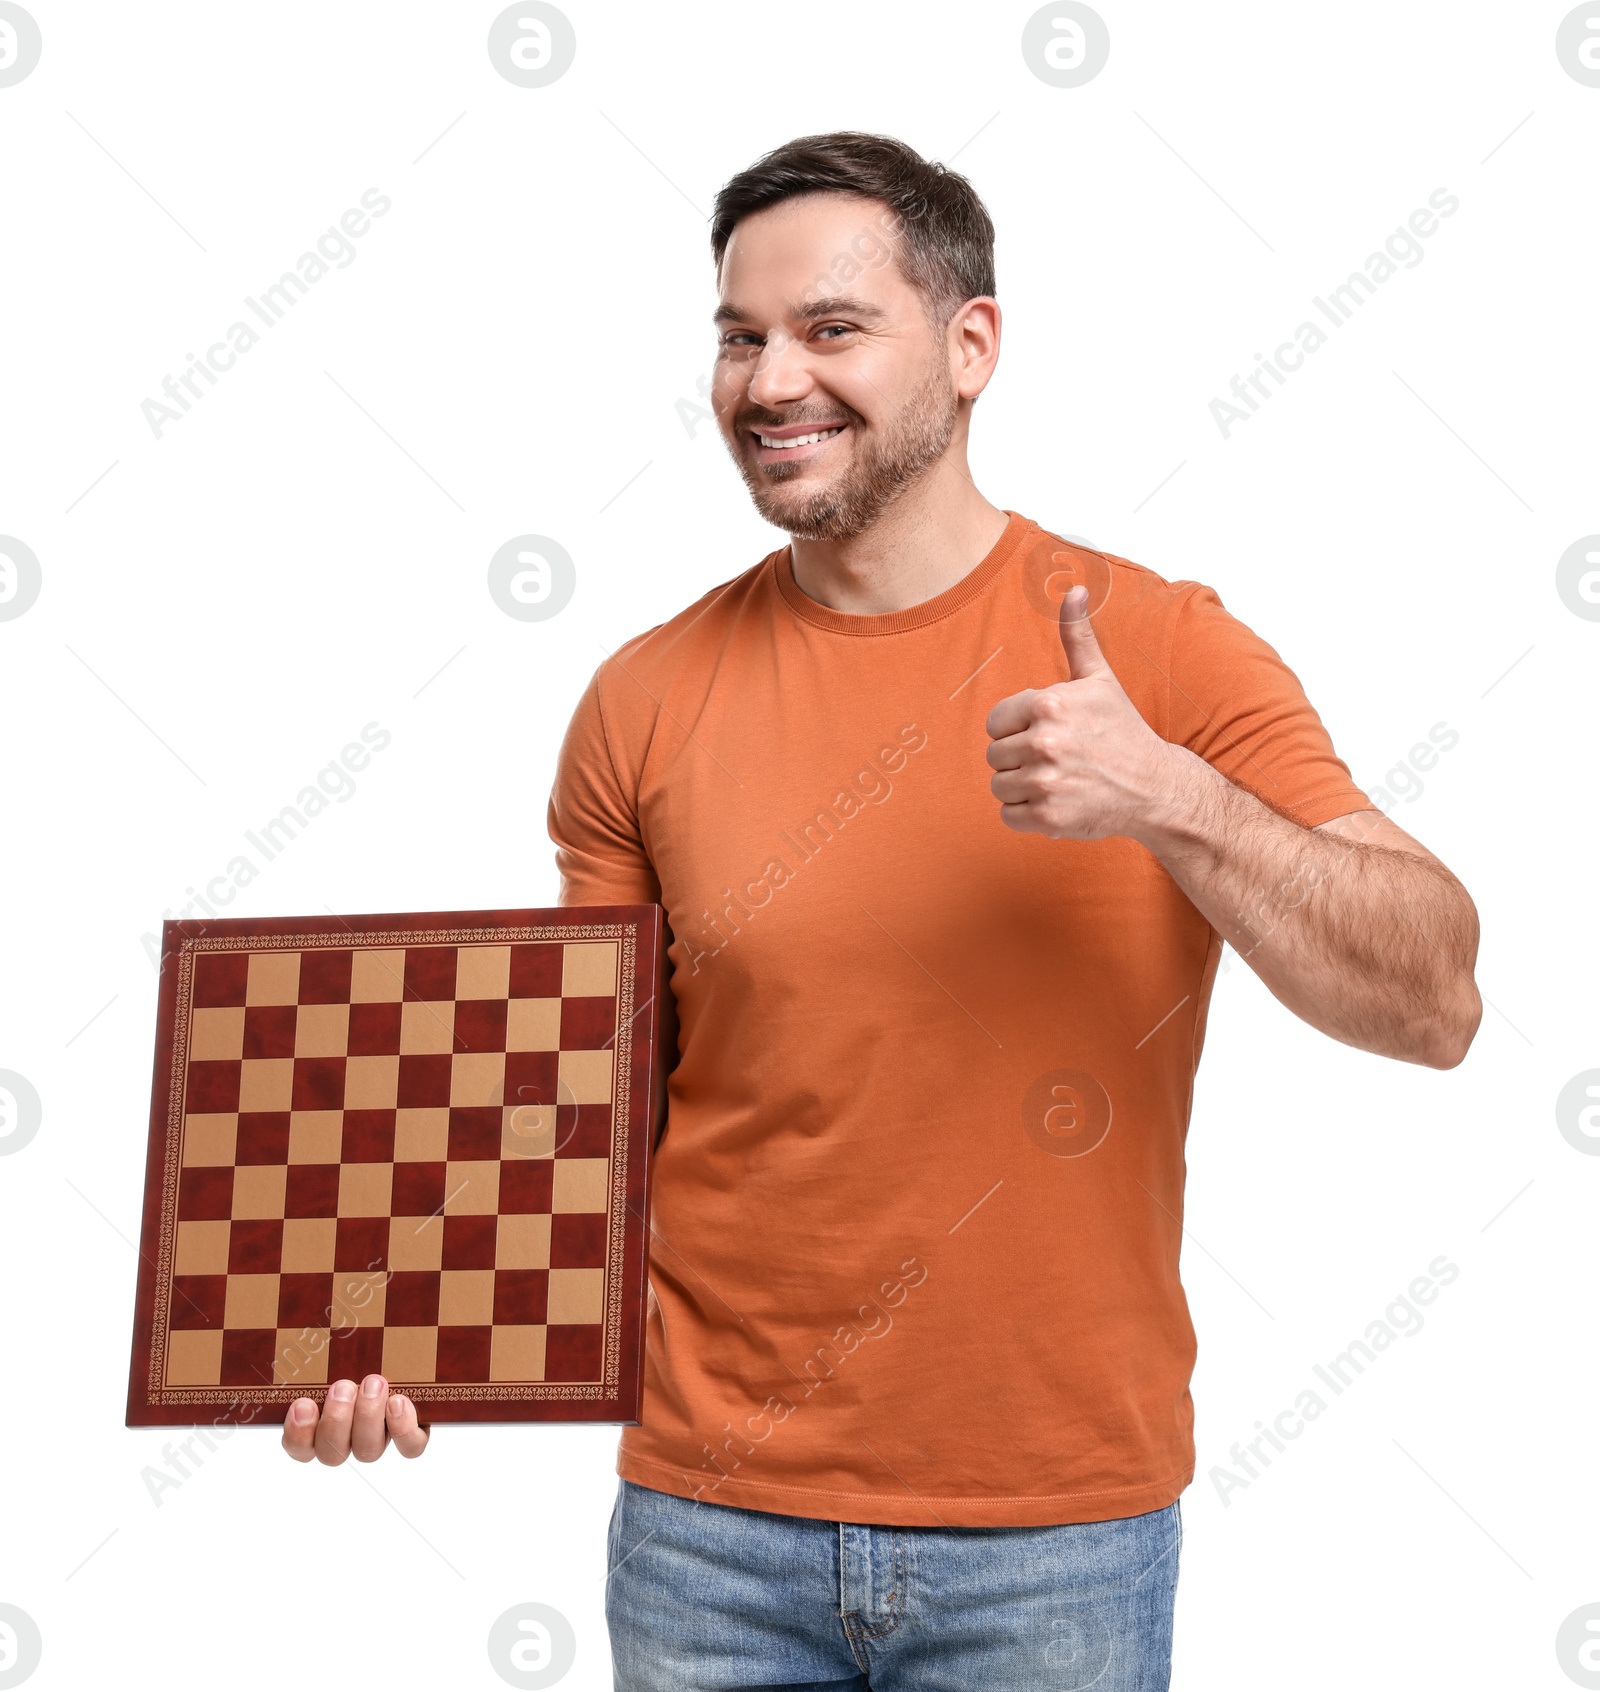 Photo of Smiling man holding chessboard and showing thumbs up on white background